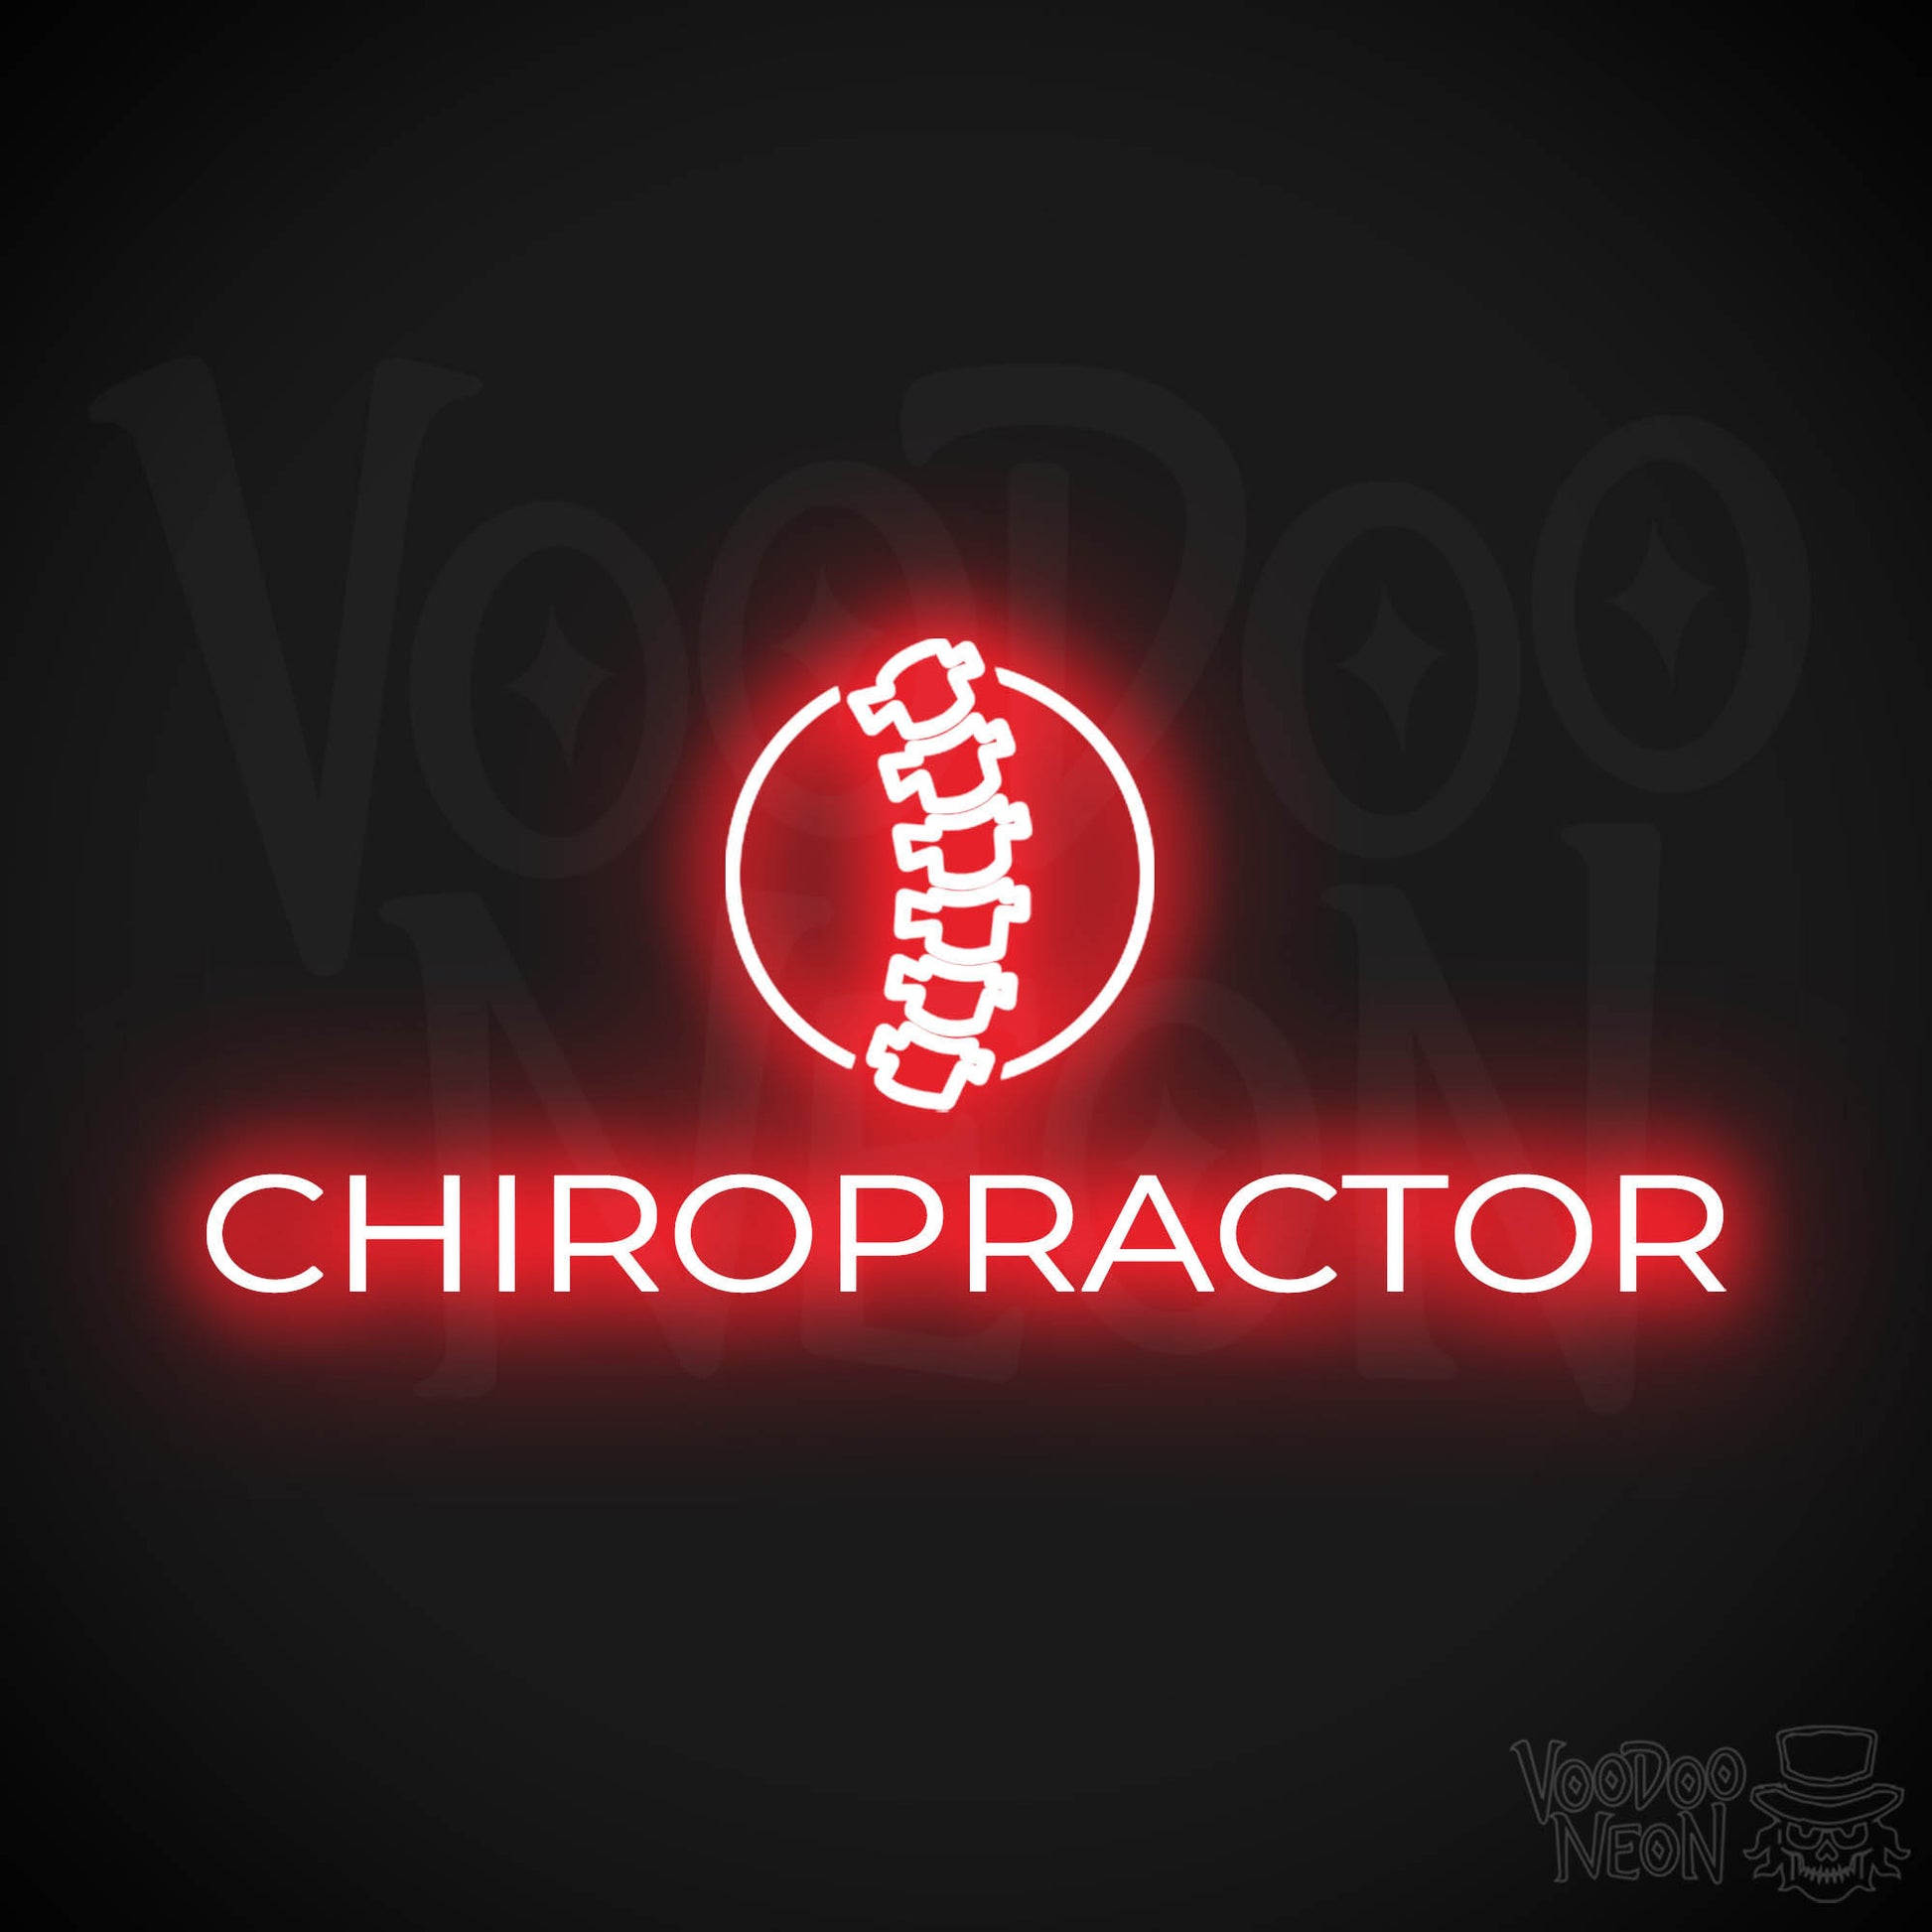 Chiropractor LED Neon - Red